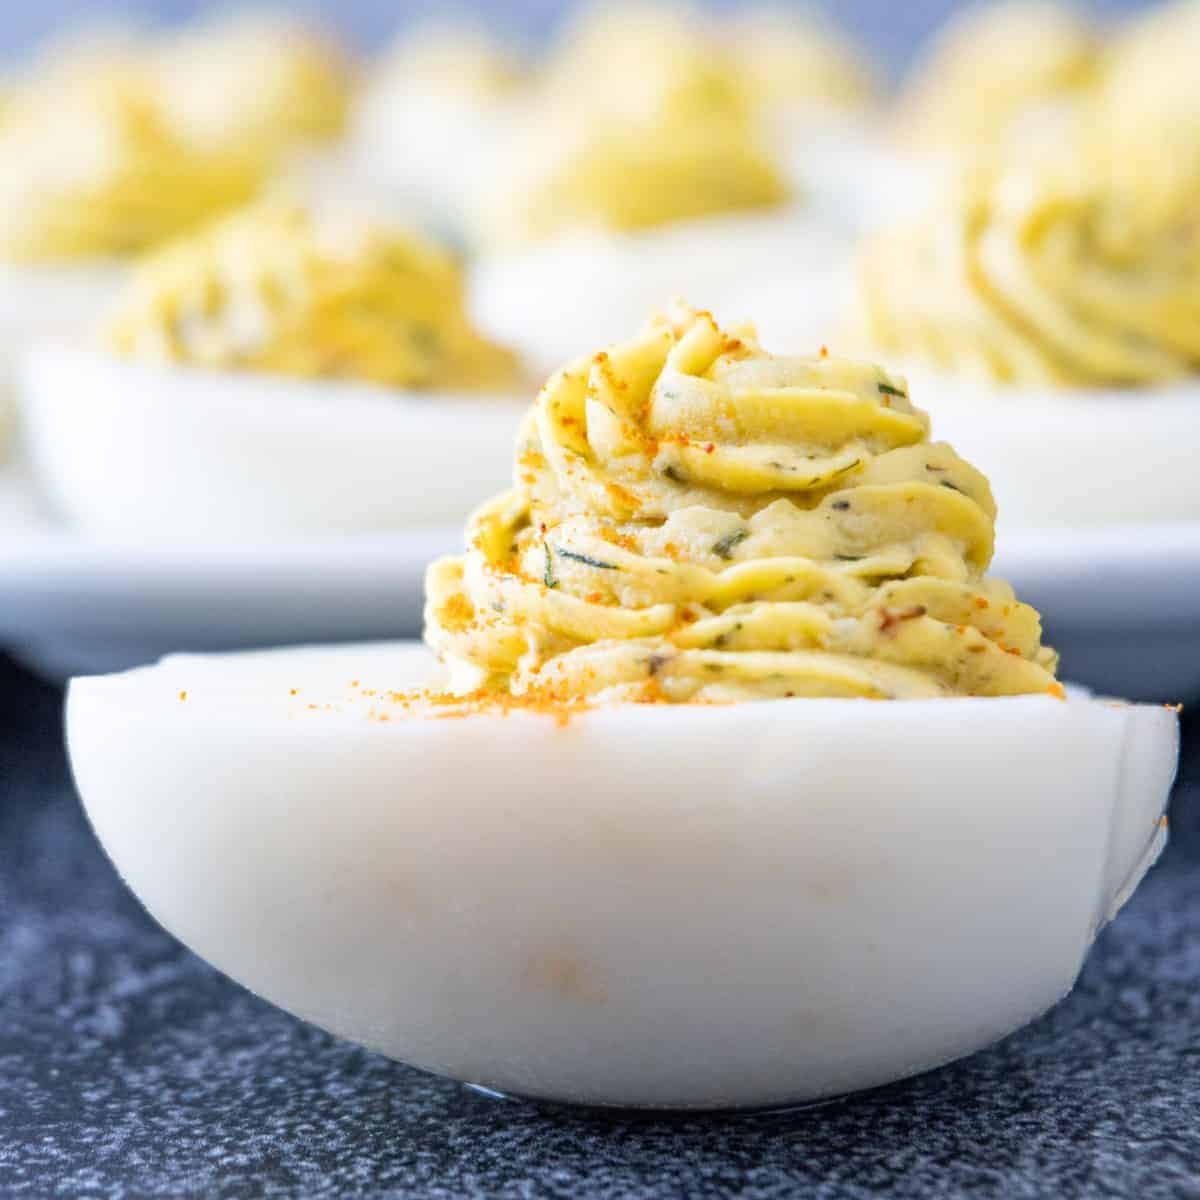 deviled egg featured image